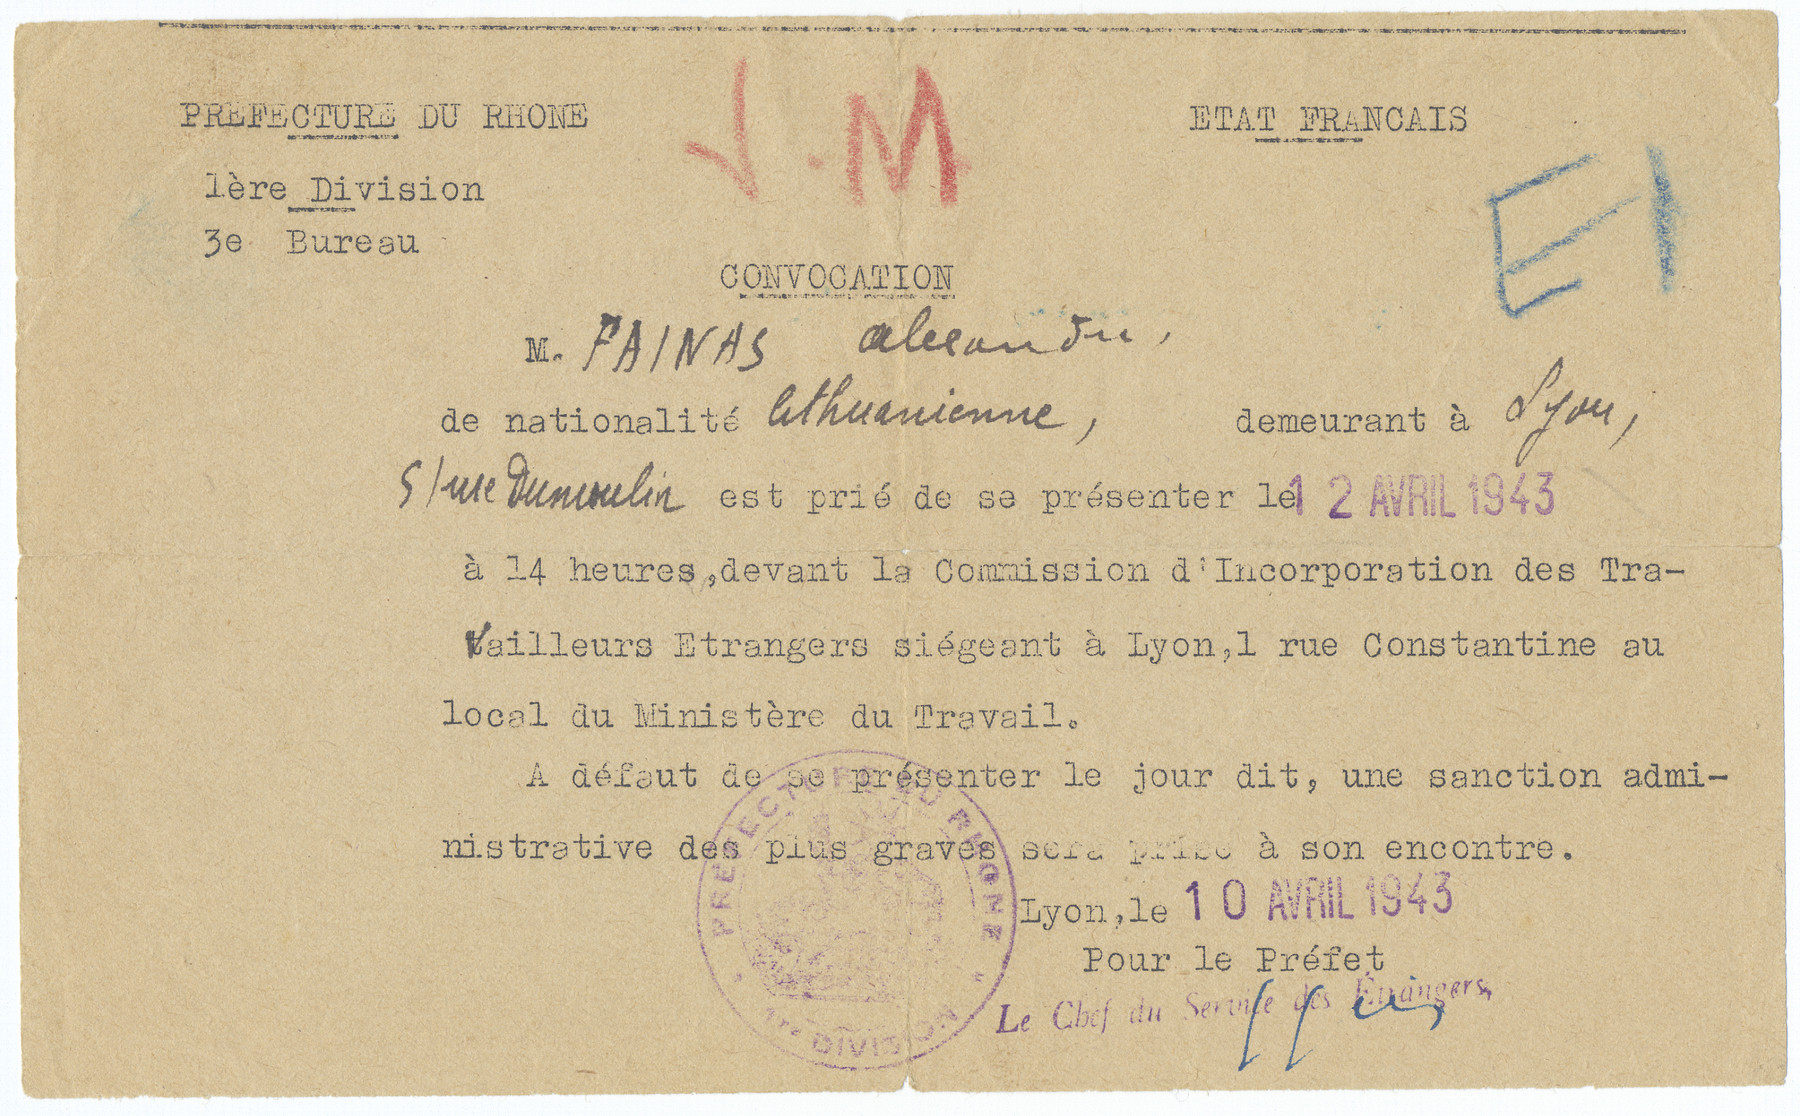 Document signed by the Prefecture of Rhone requiring Alexander Fainas to report in two days time.  Had he not run away, this would have been his deportation notice.